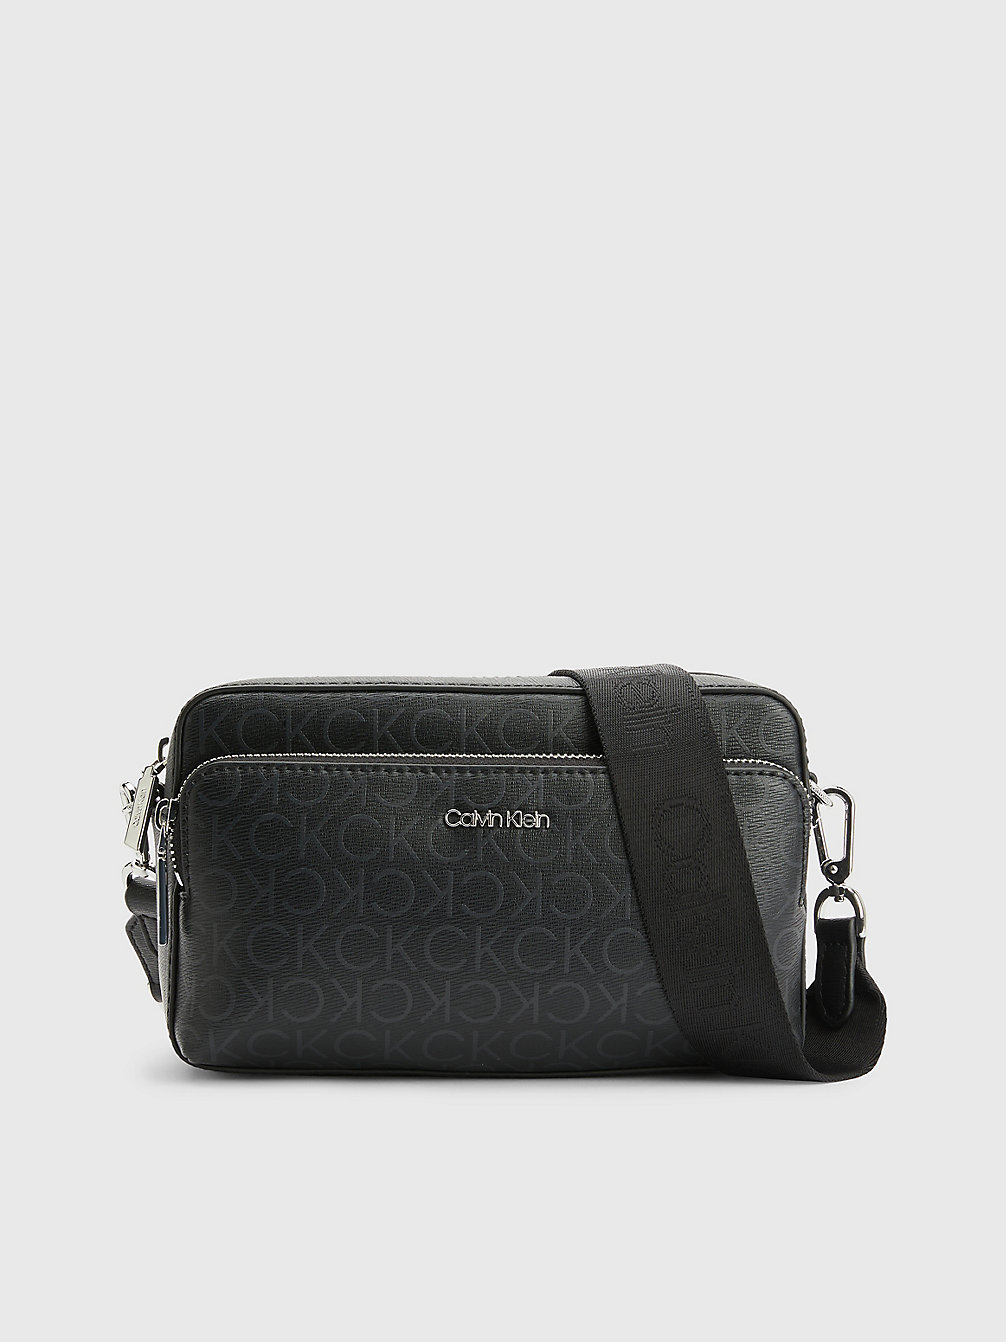 BLACK MONO Large Recycled Crossbody Bag undefined women Calvin Klein